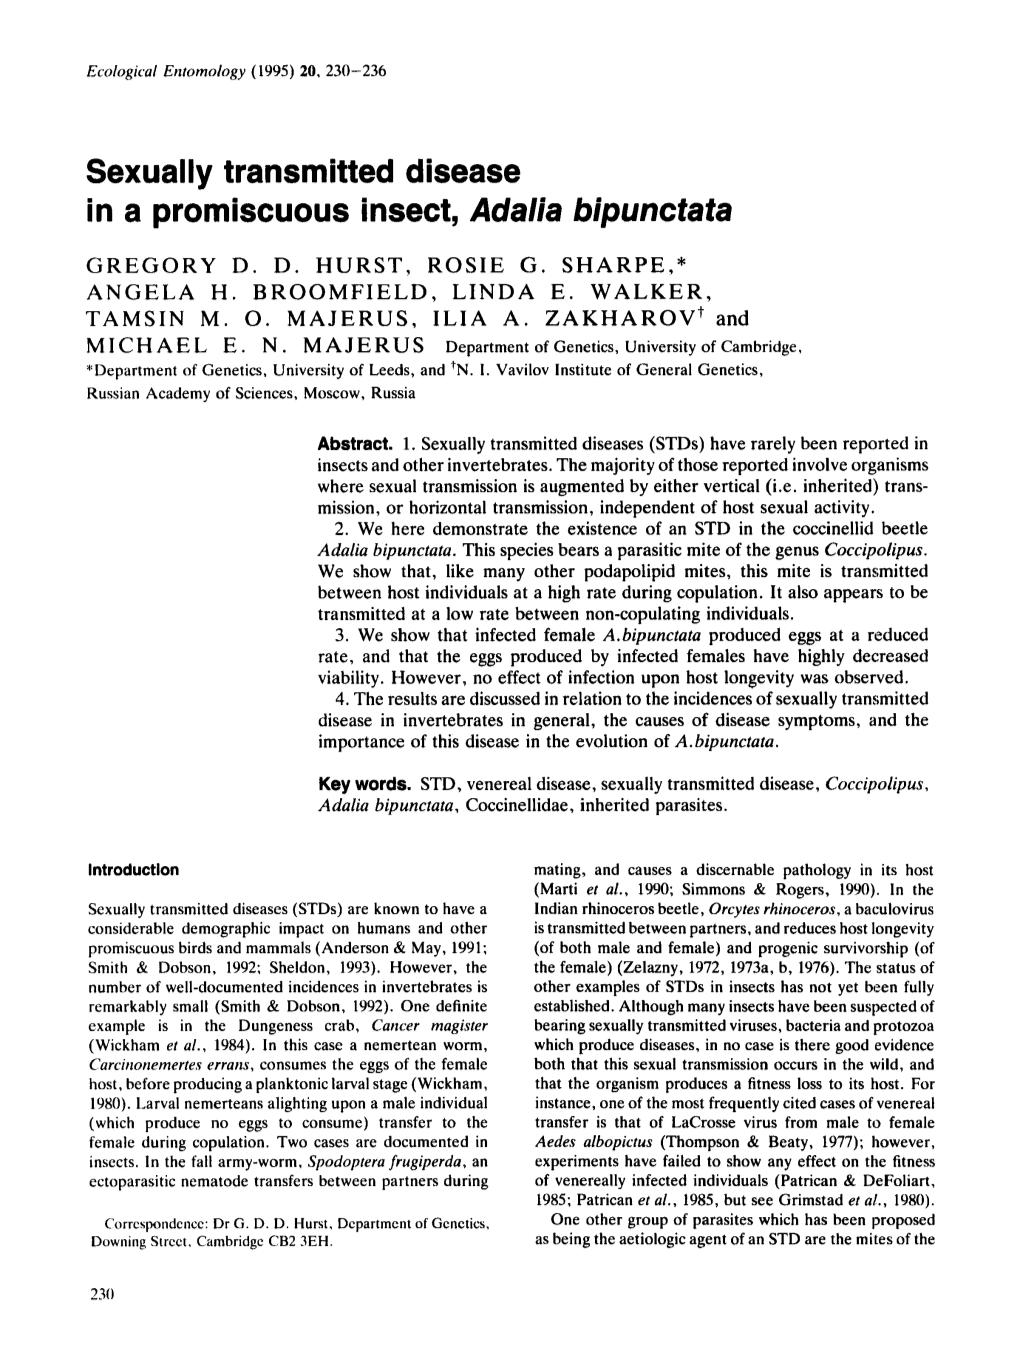 Sexually Transmitted Disease in a Promiscuous Insect, Adalia Bipunctata